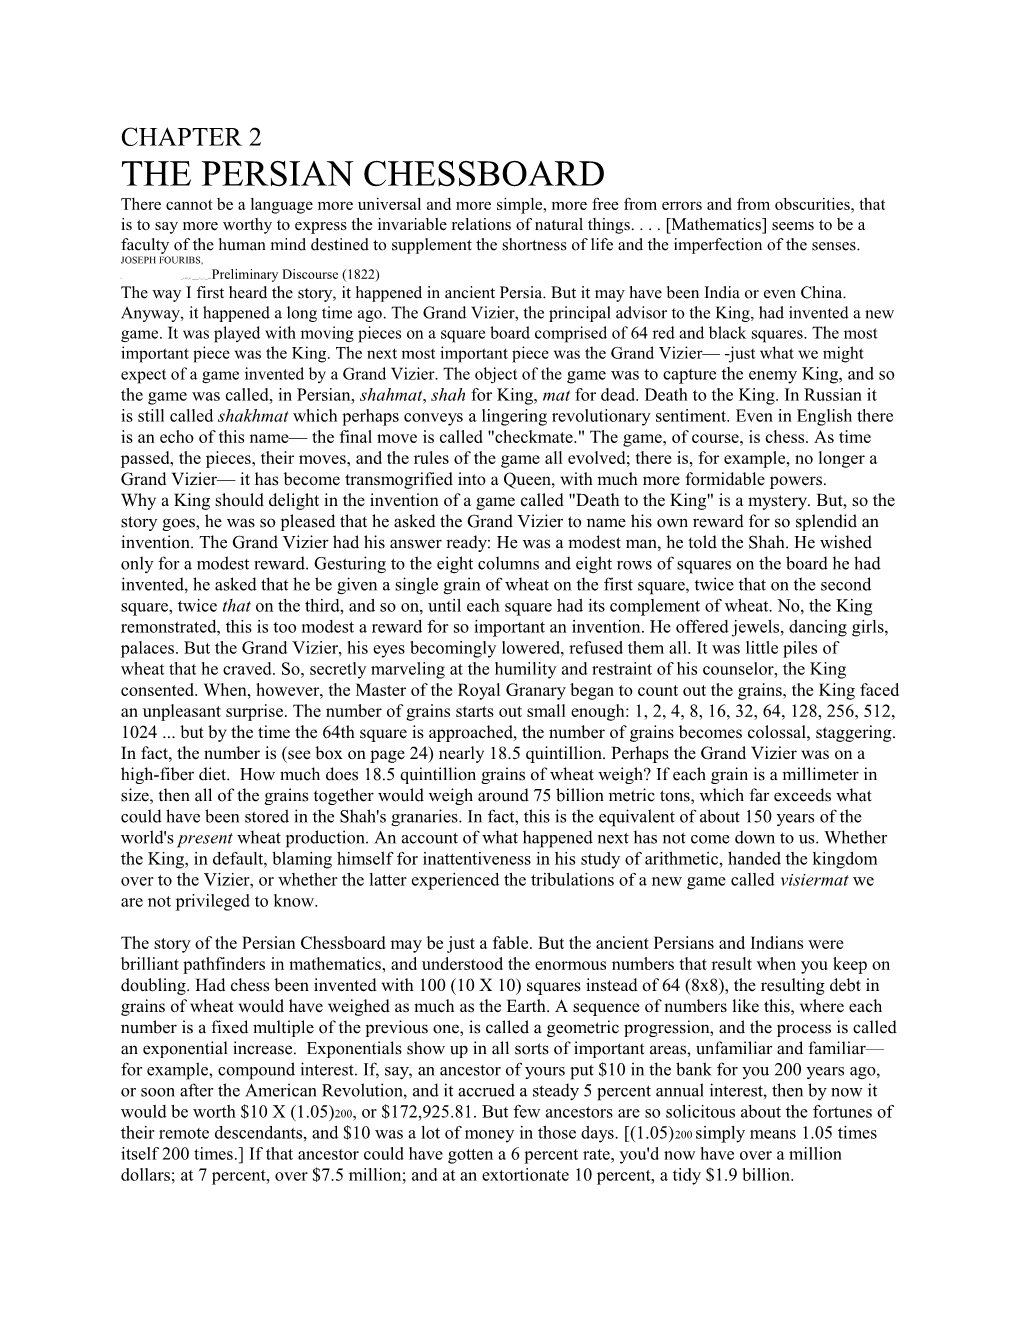 The Persian Chessboard